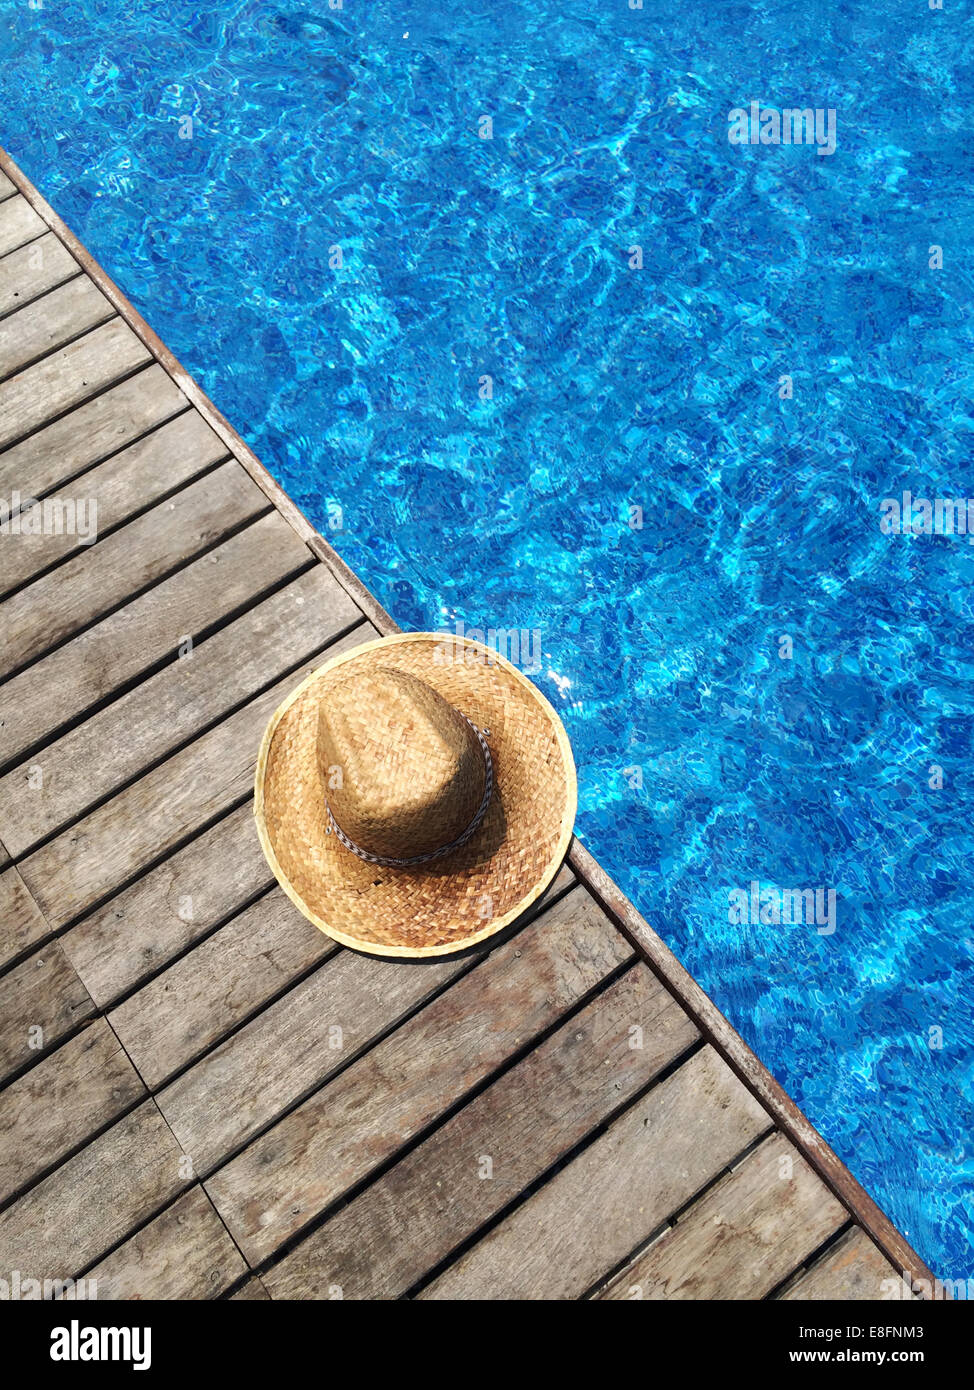 Straw sun hat by swimming pool Stock Photo